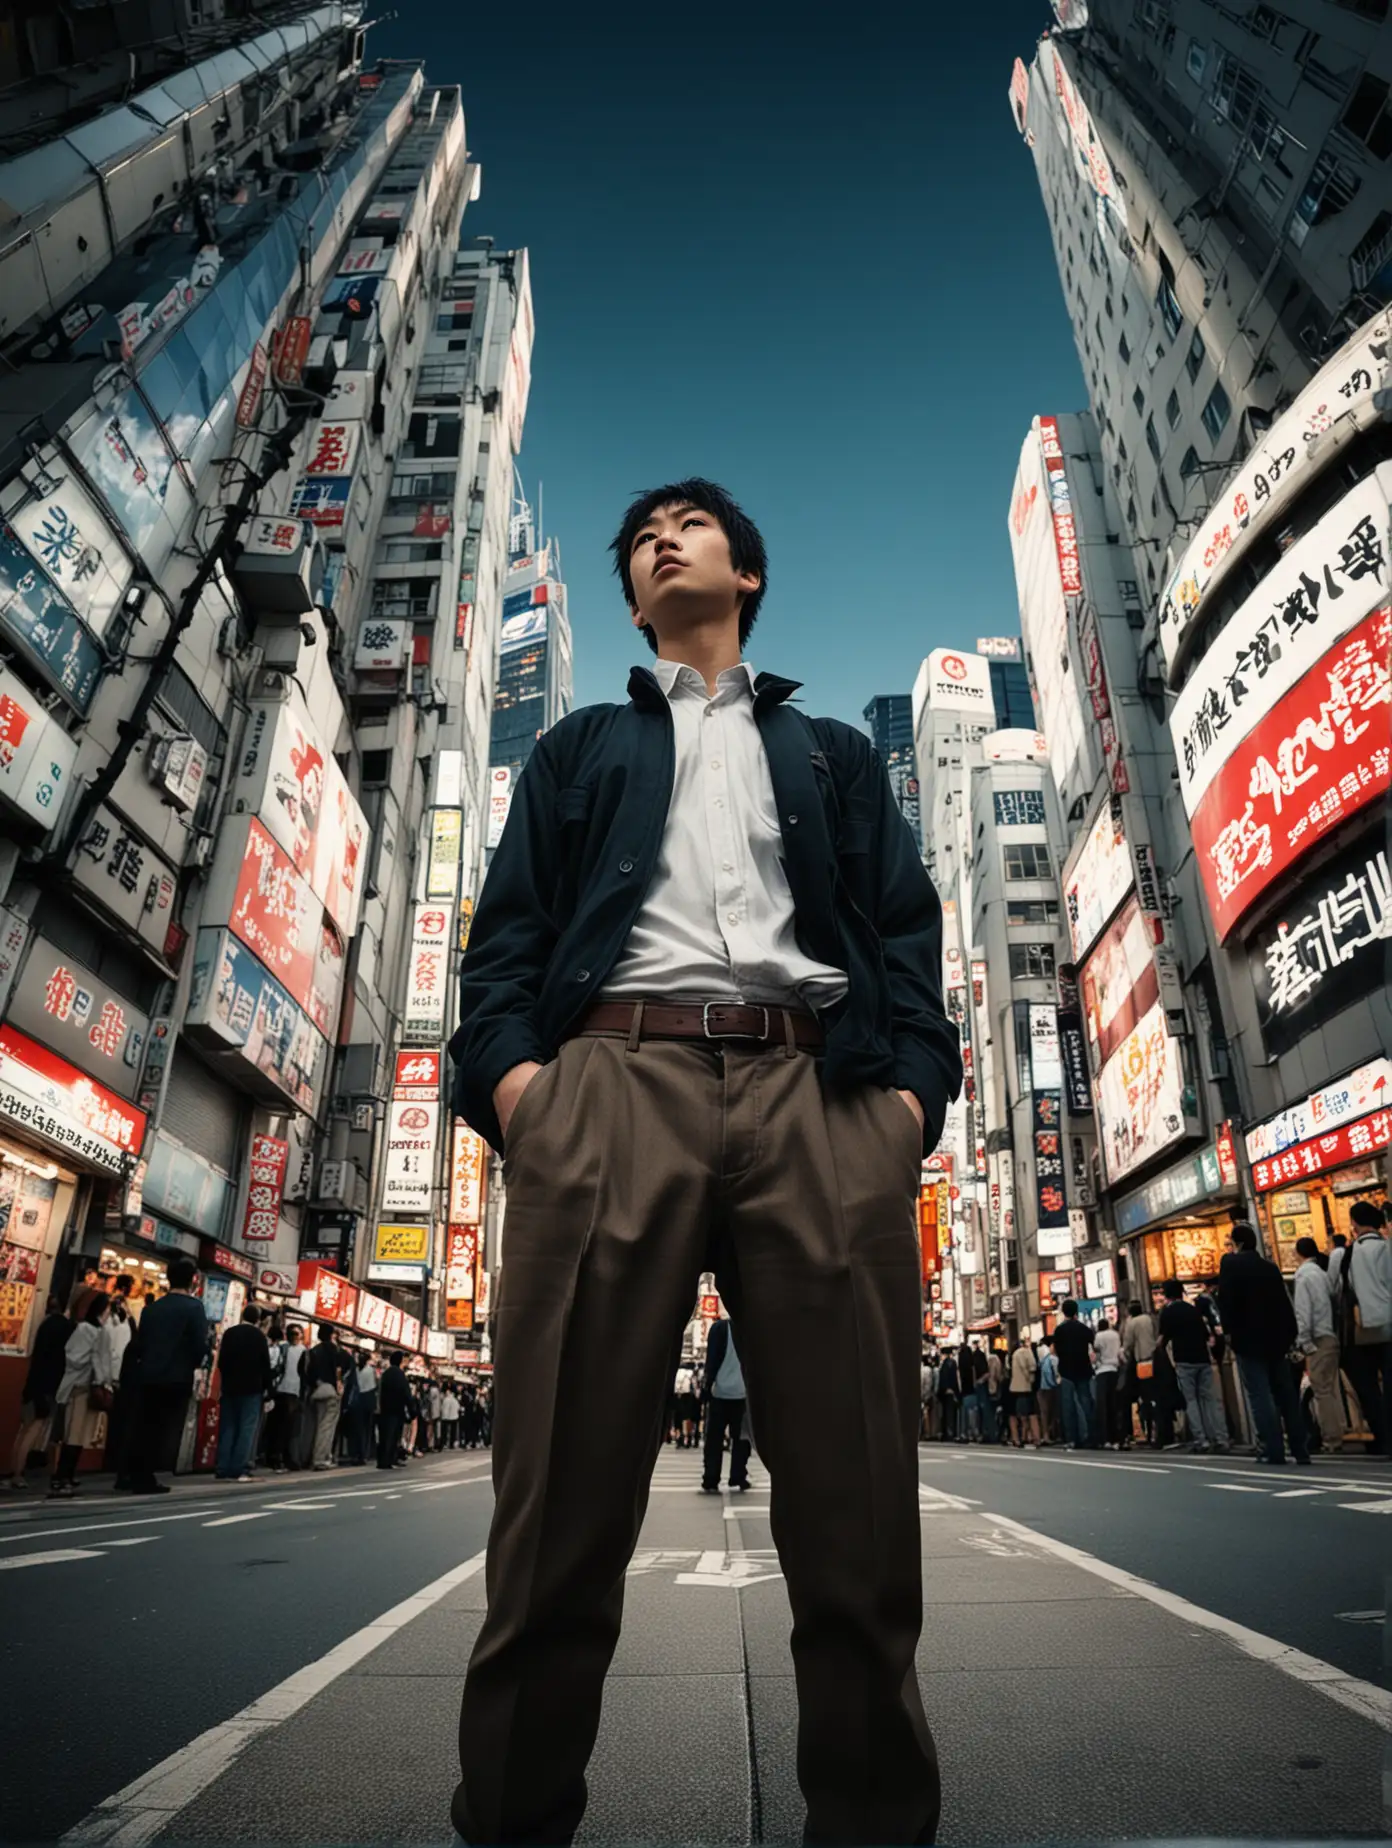 "Visualize a captivating moment unfolding in the vibrant streets of Akihabara, where a young man stands confidently, his hands casually tucked into his pockets as he gazes directly towards the camera. Capture the scene from a very low-angle viewpoint, with the towering buildings towering overhead. Employ a fish-eye effect lens to distort the surroundings, amplifying the energy of the bustling streets and emphasizing the charismatic presence of the central figure."